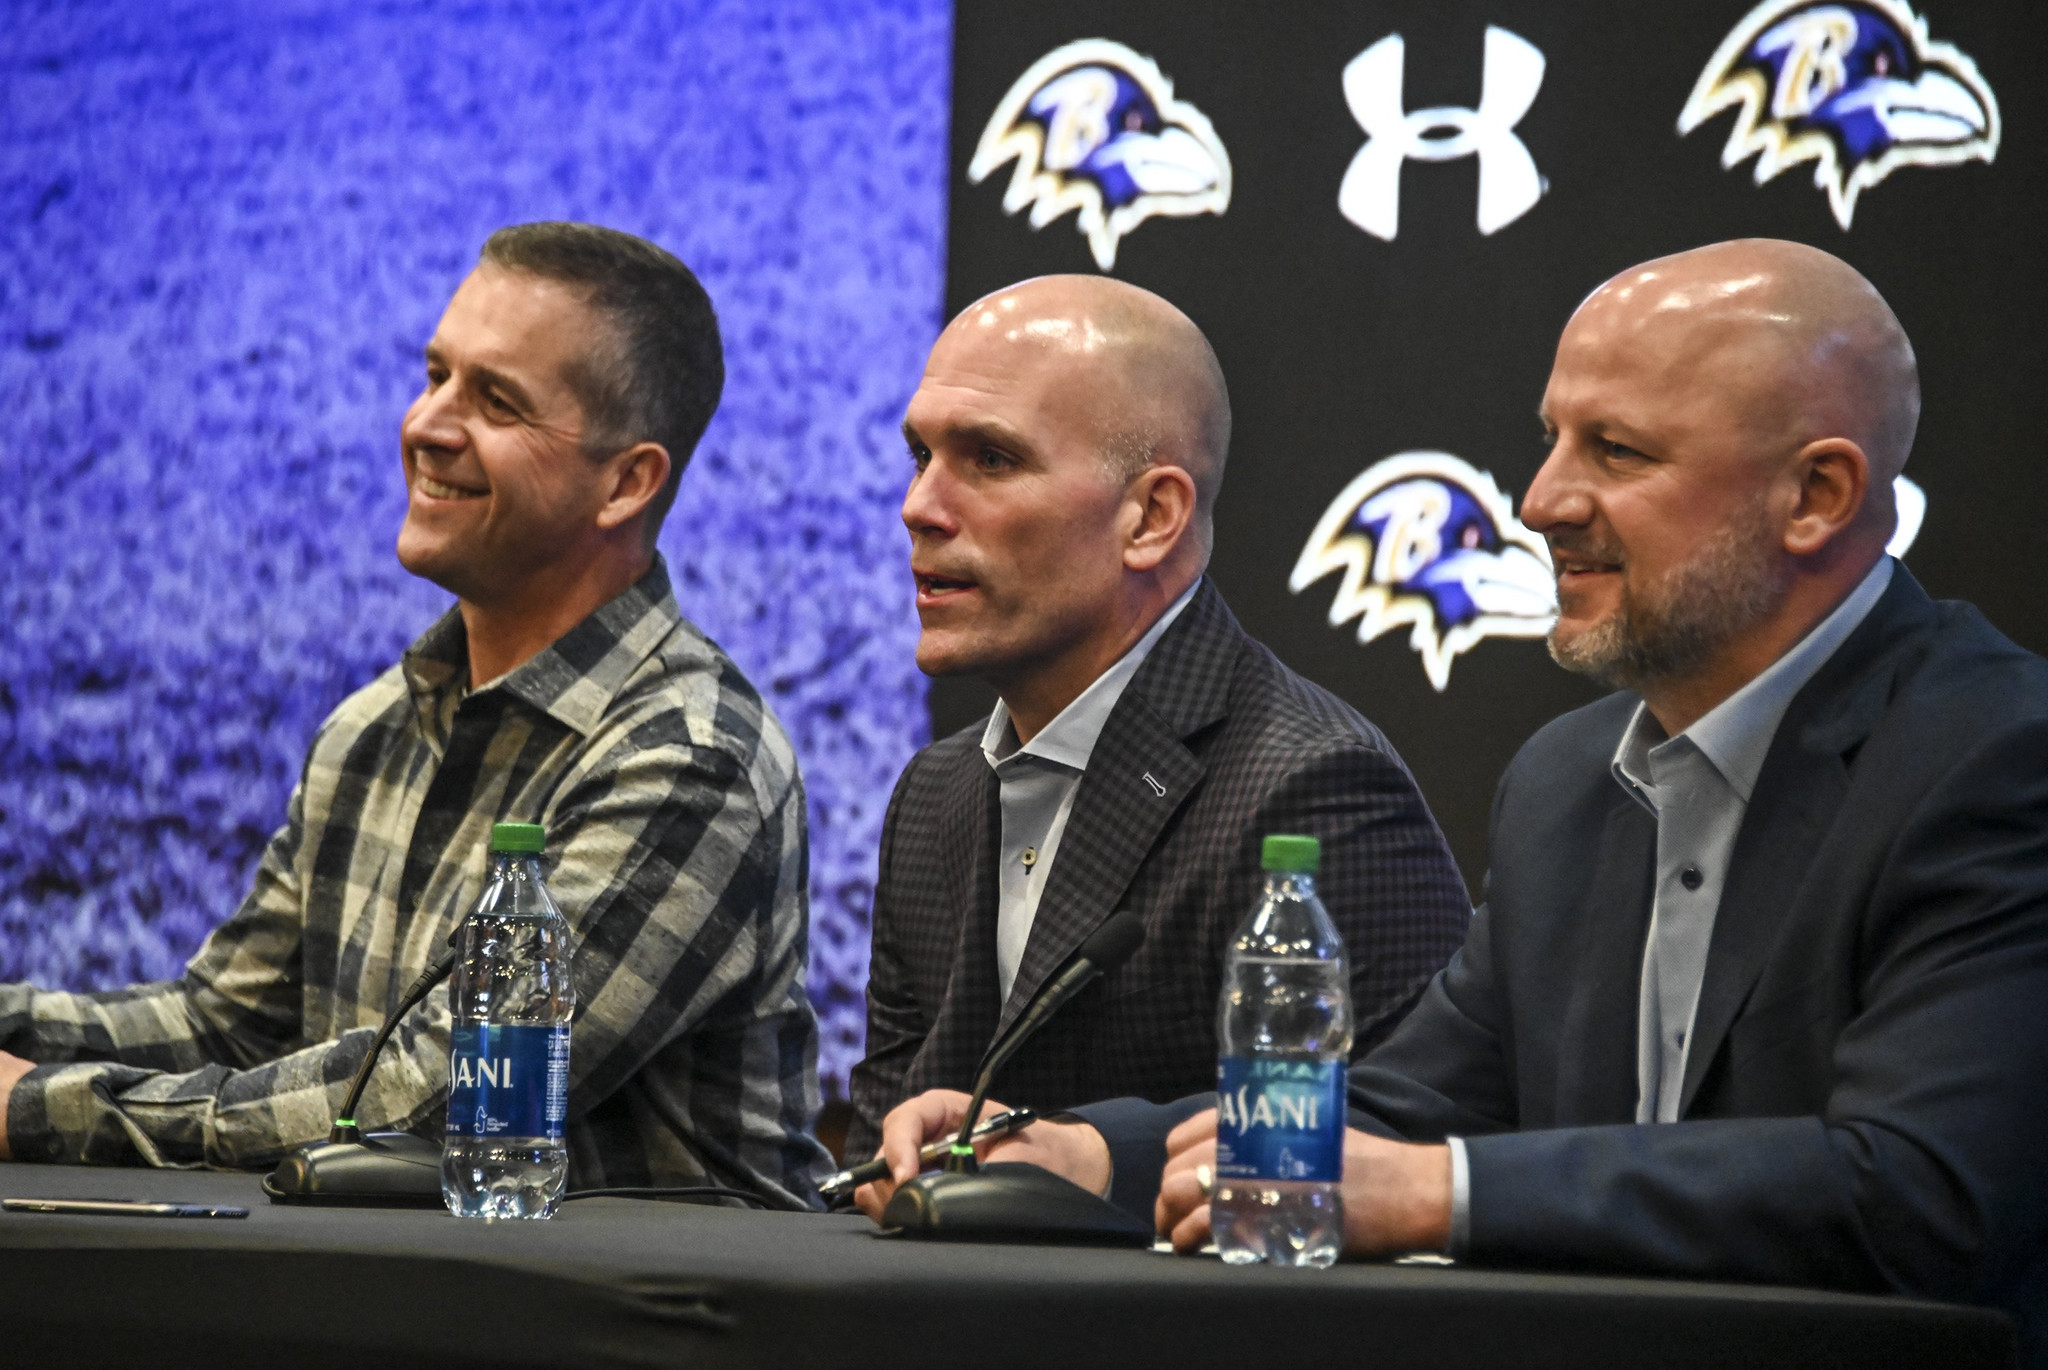 Ravens 2022 Draft: Overwhelming A+ grades for Day 1 picks